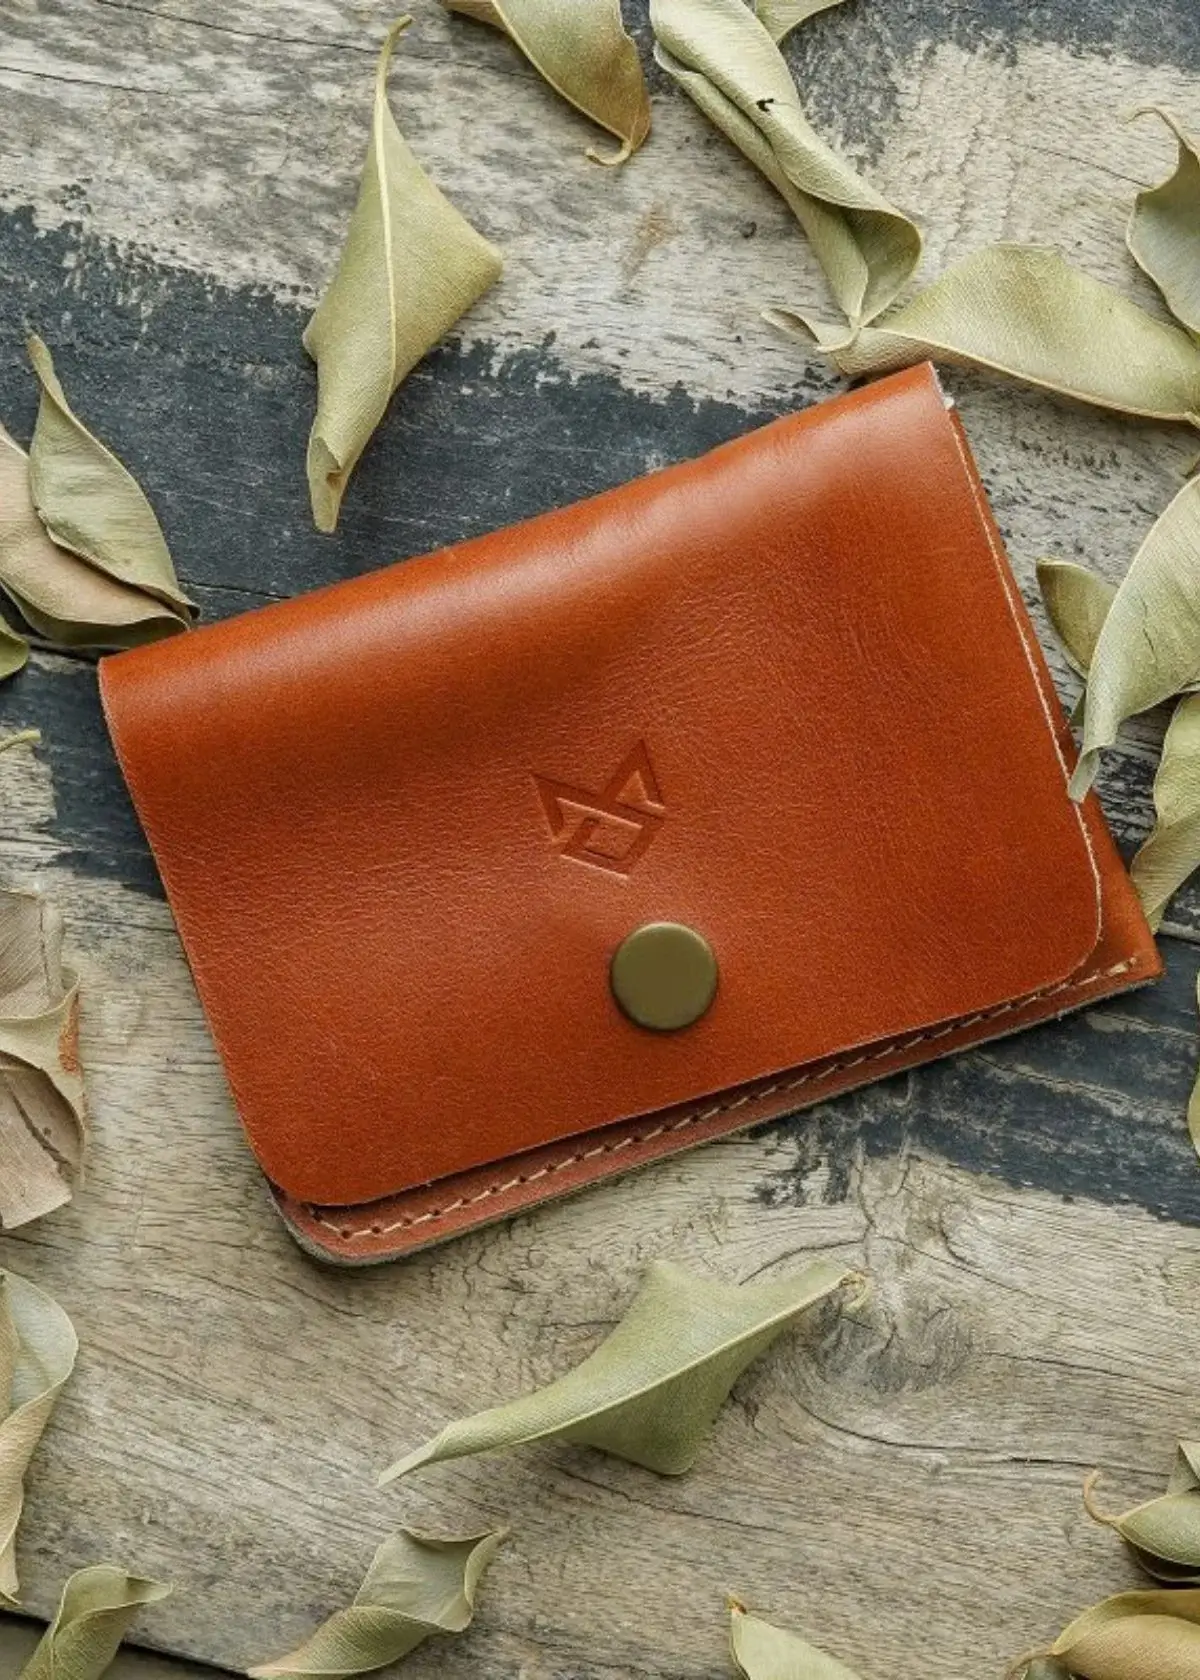 What features does a Fox Racing Men's wallet offer?